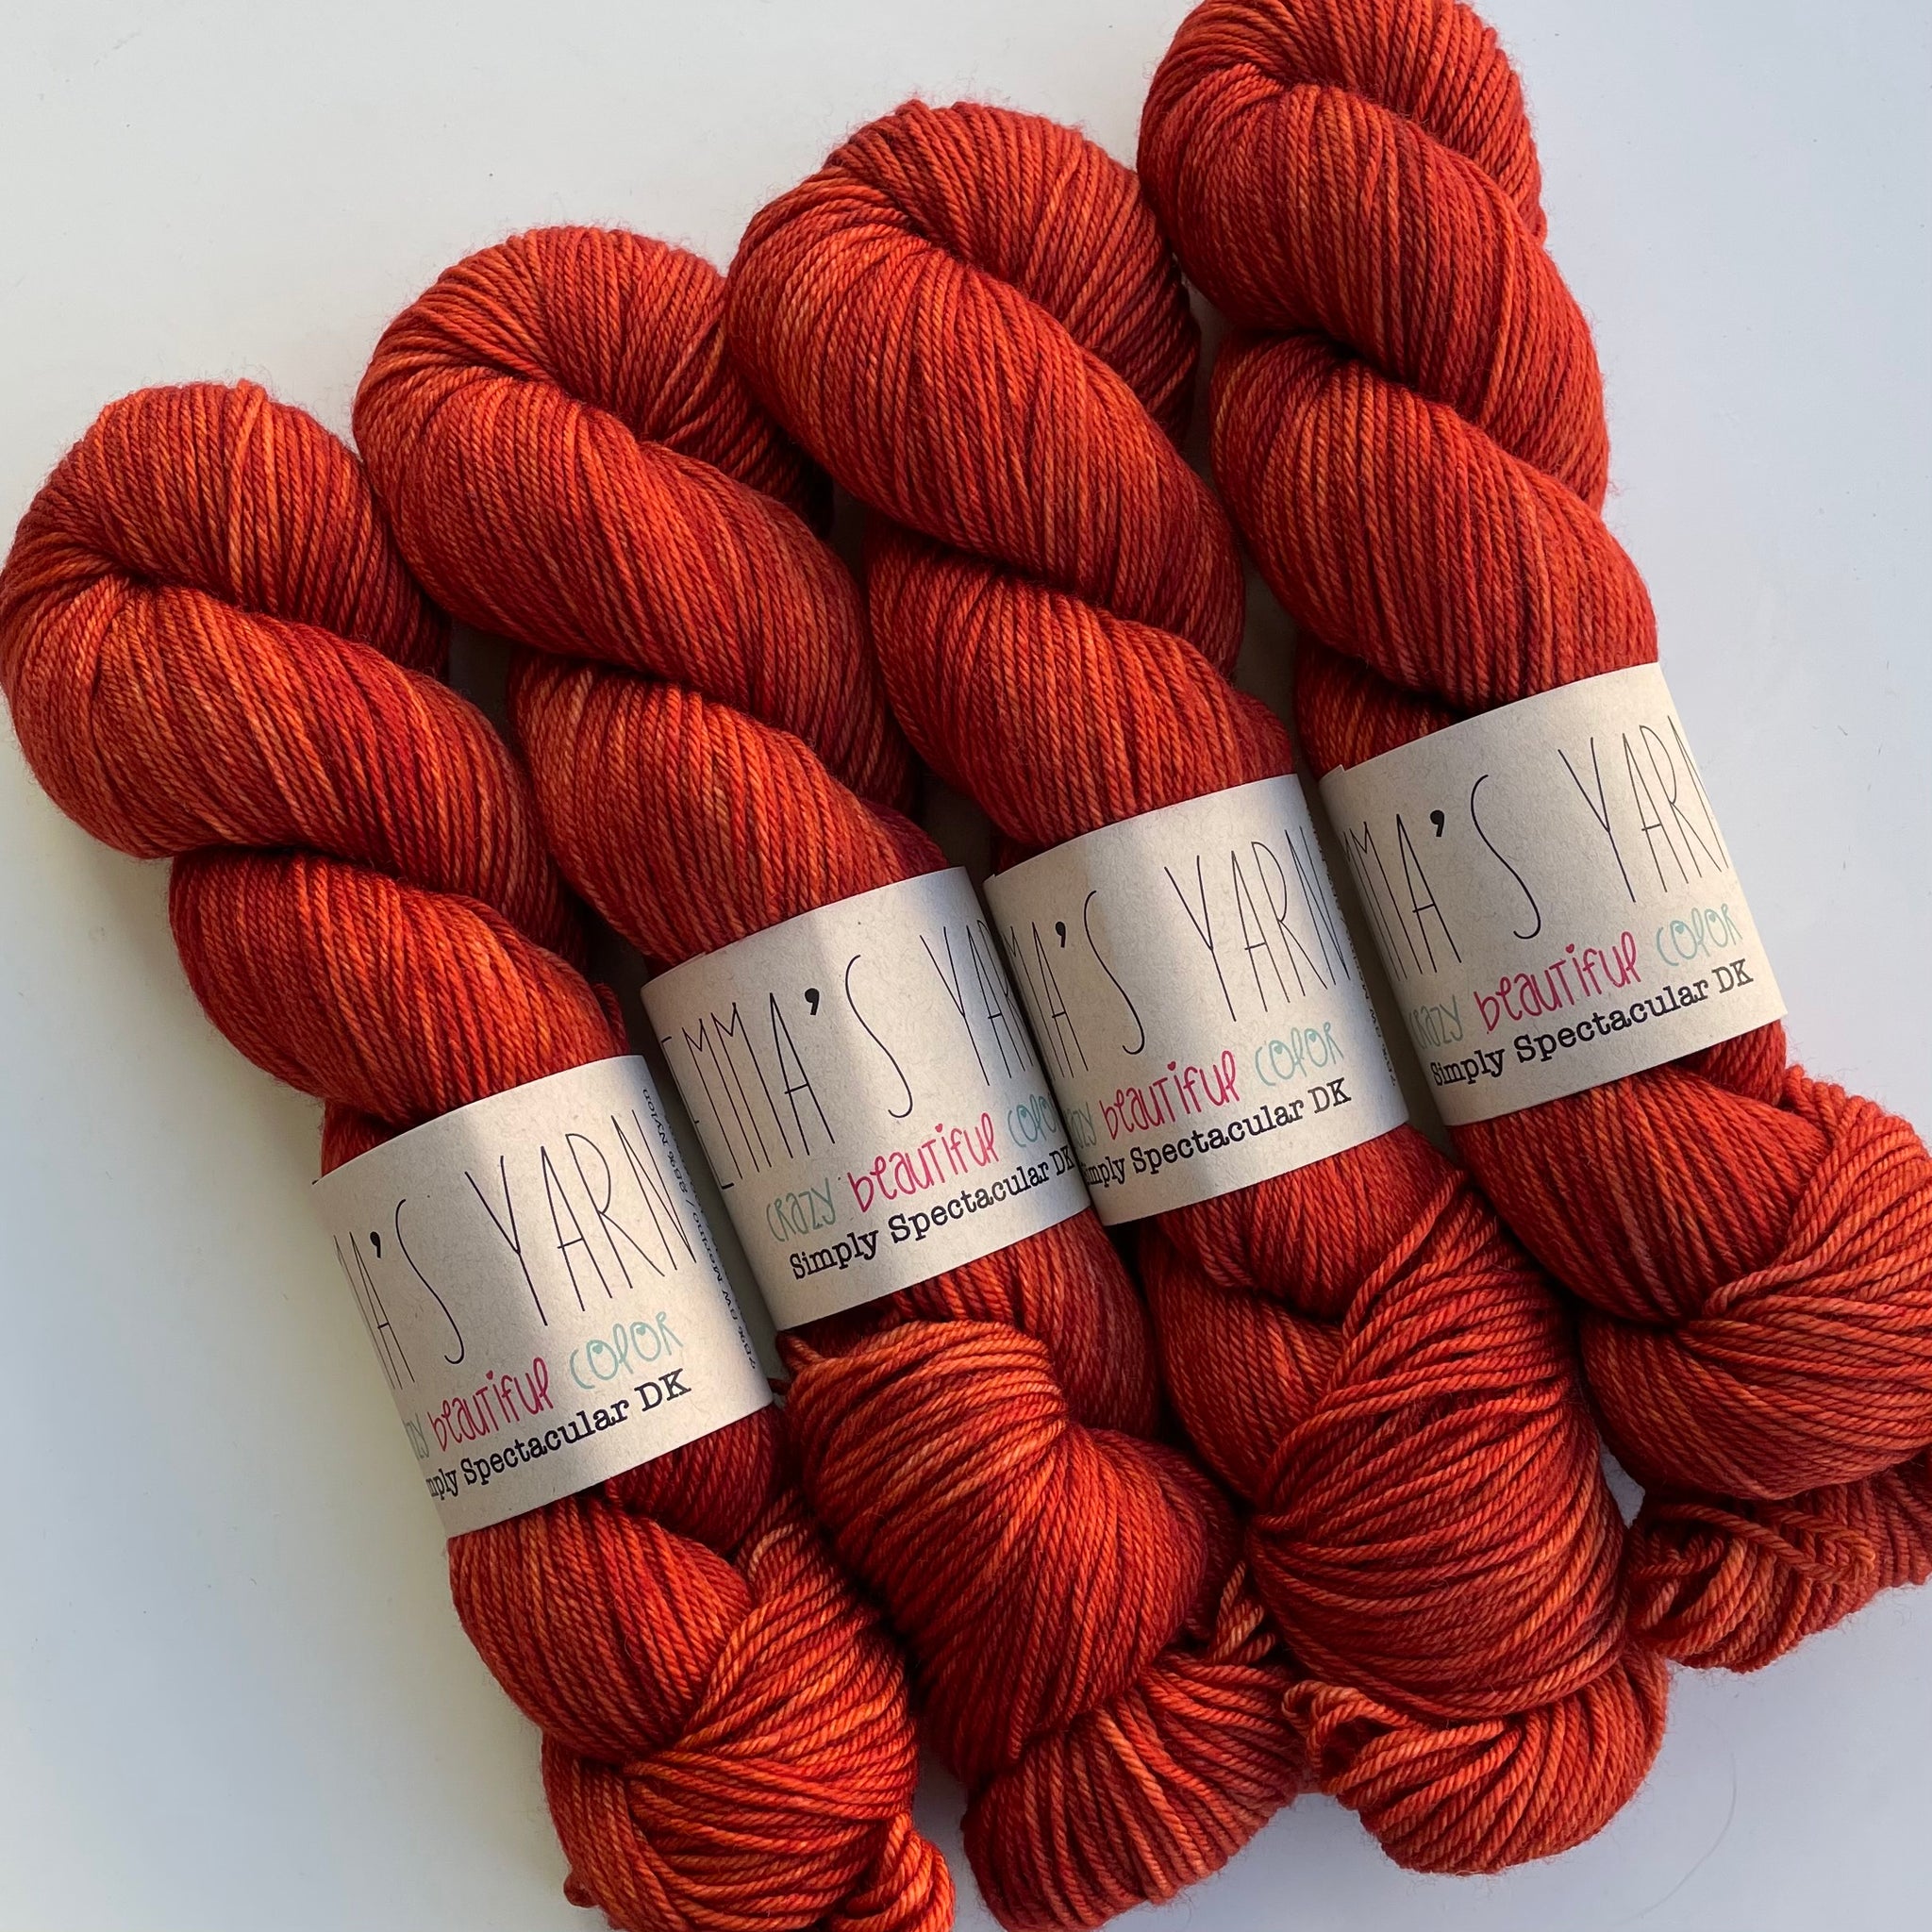 Foxy Lady - Simply Spectacular DK SMALLS